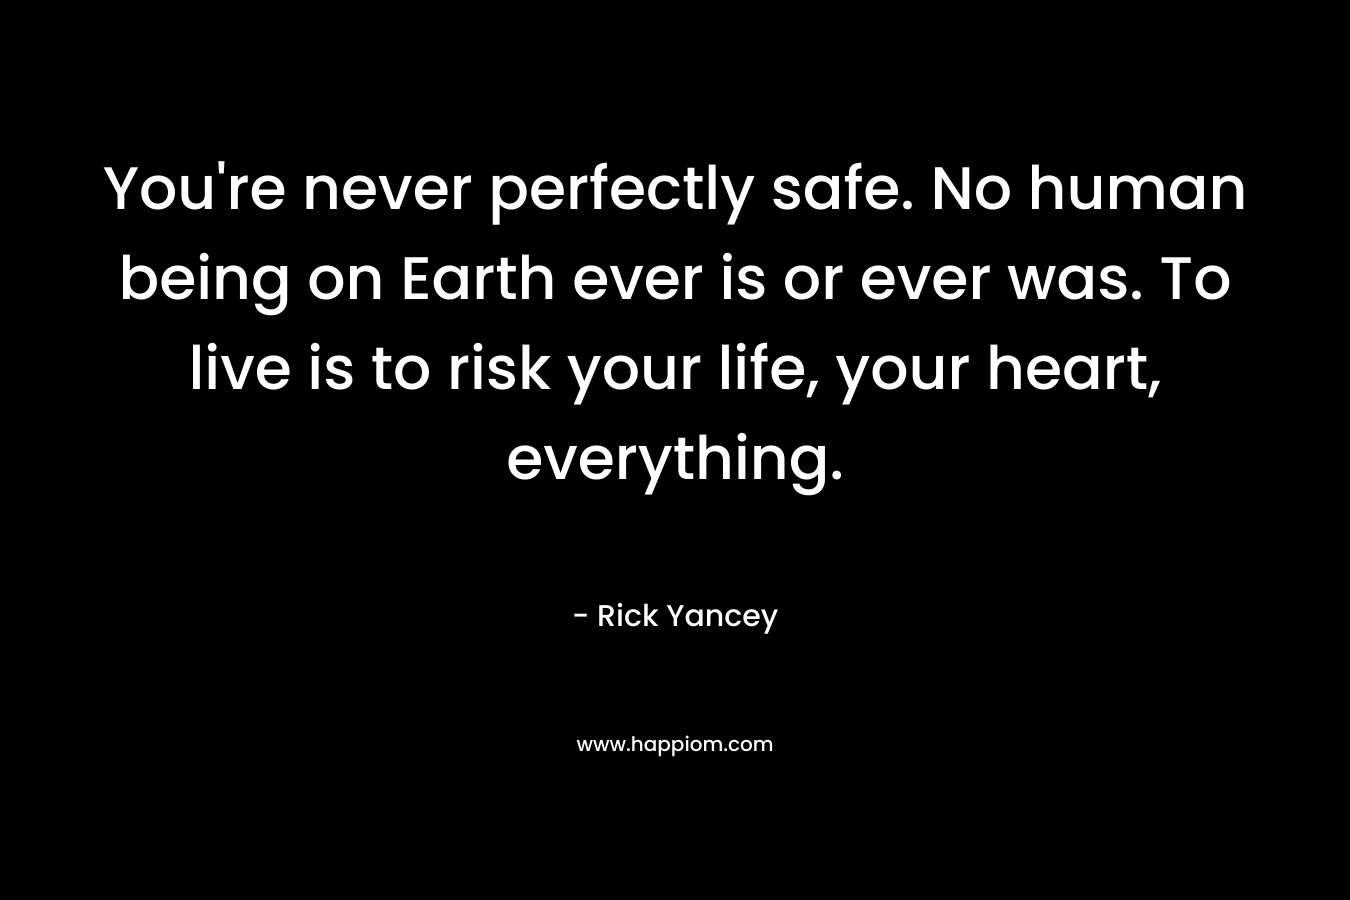 You're never perfectly safe. No human being on Earth ever is or ever was. To live is to risk your life, your heart, everything.